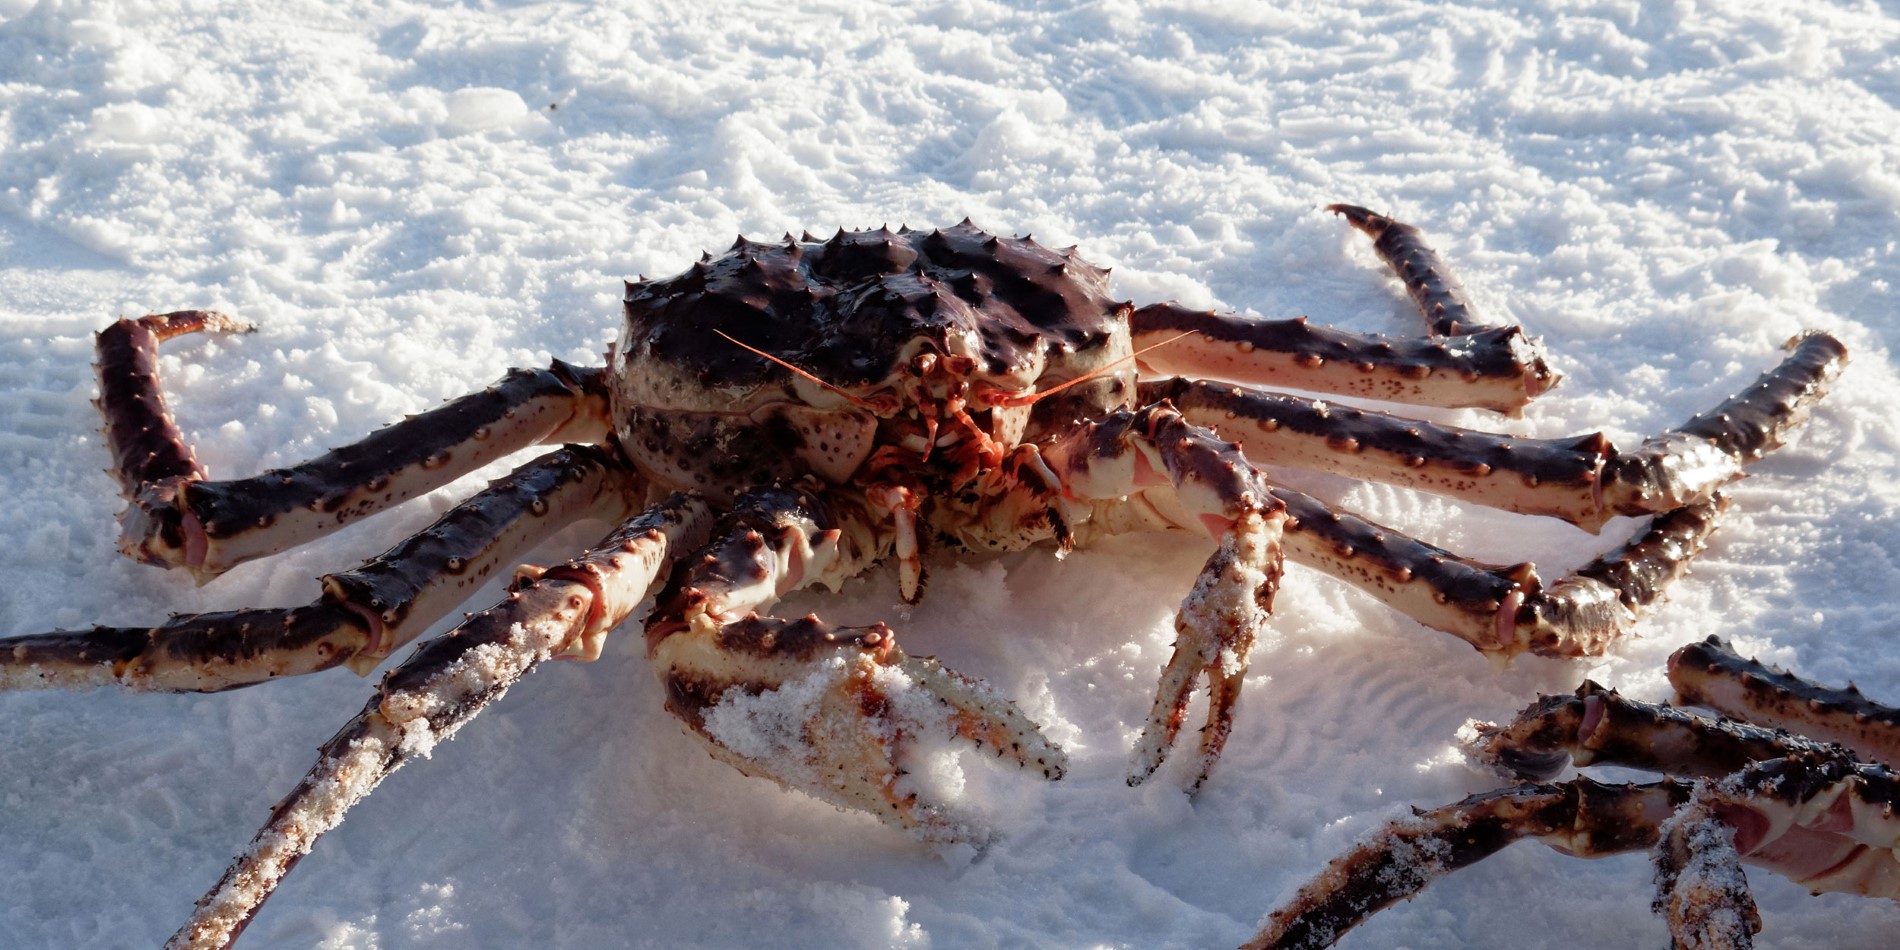 A crab in the snow